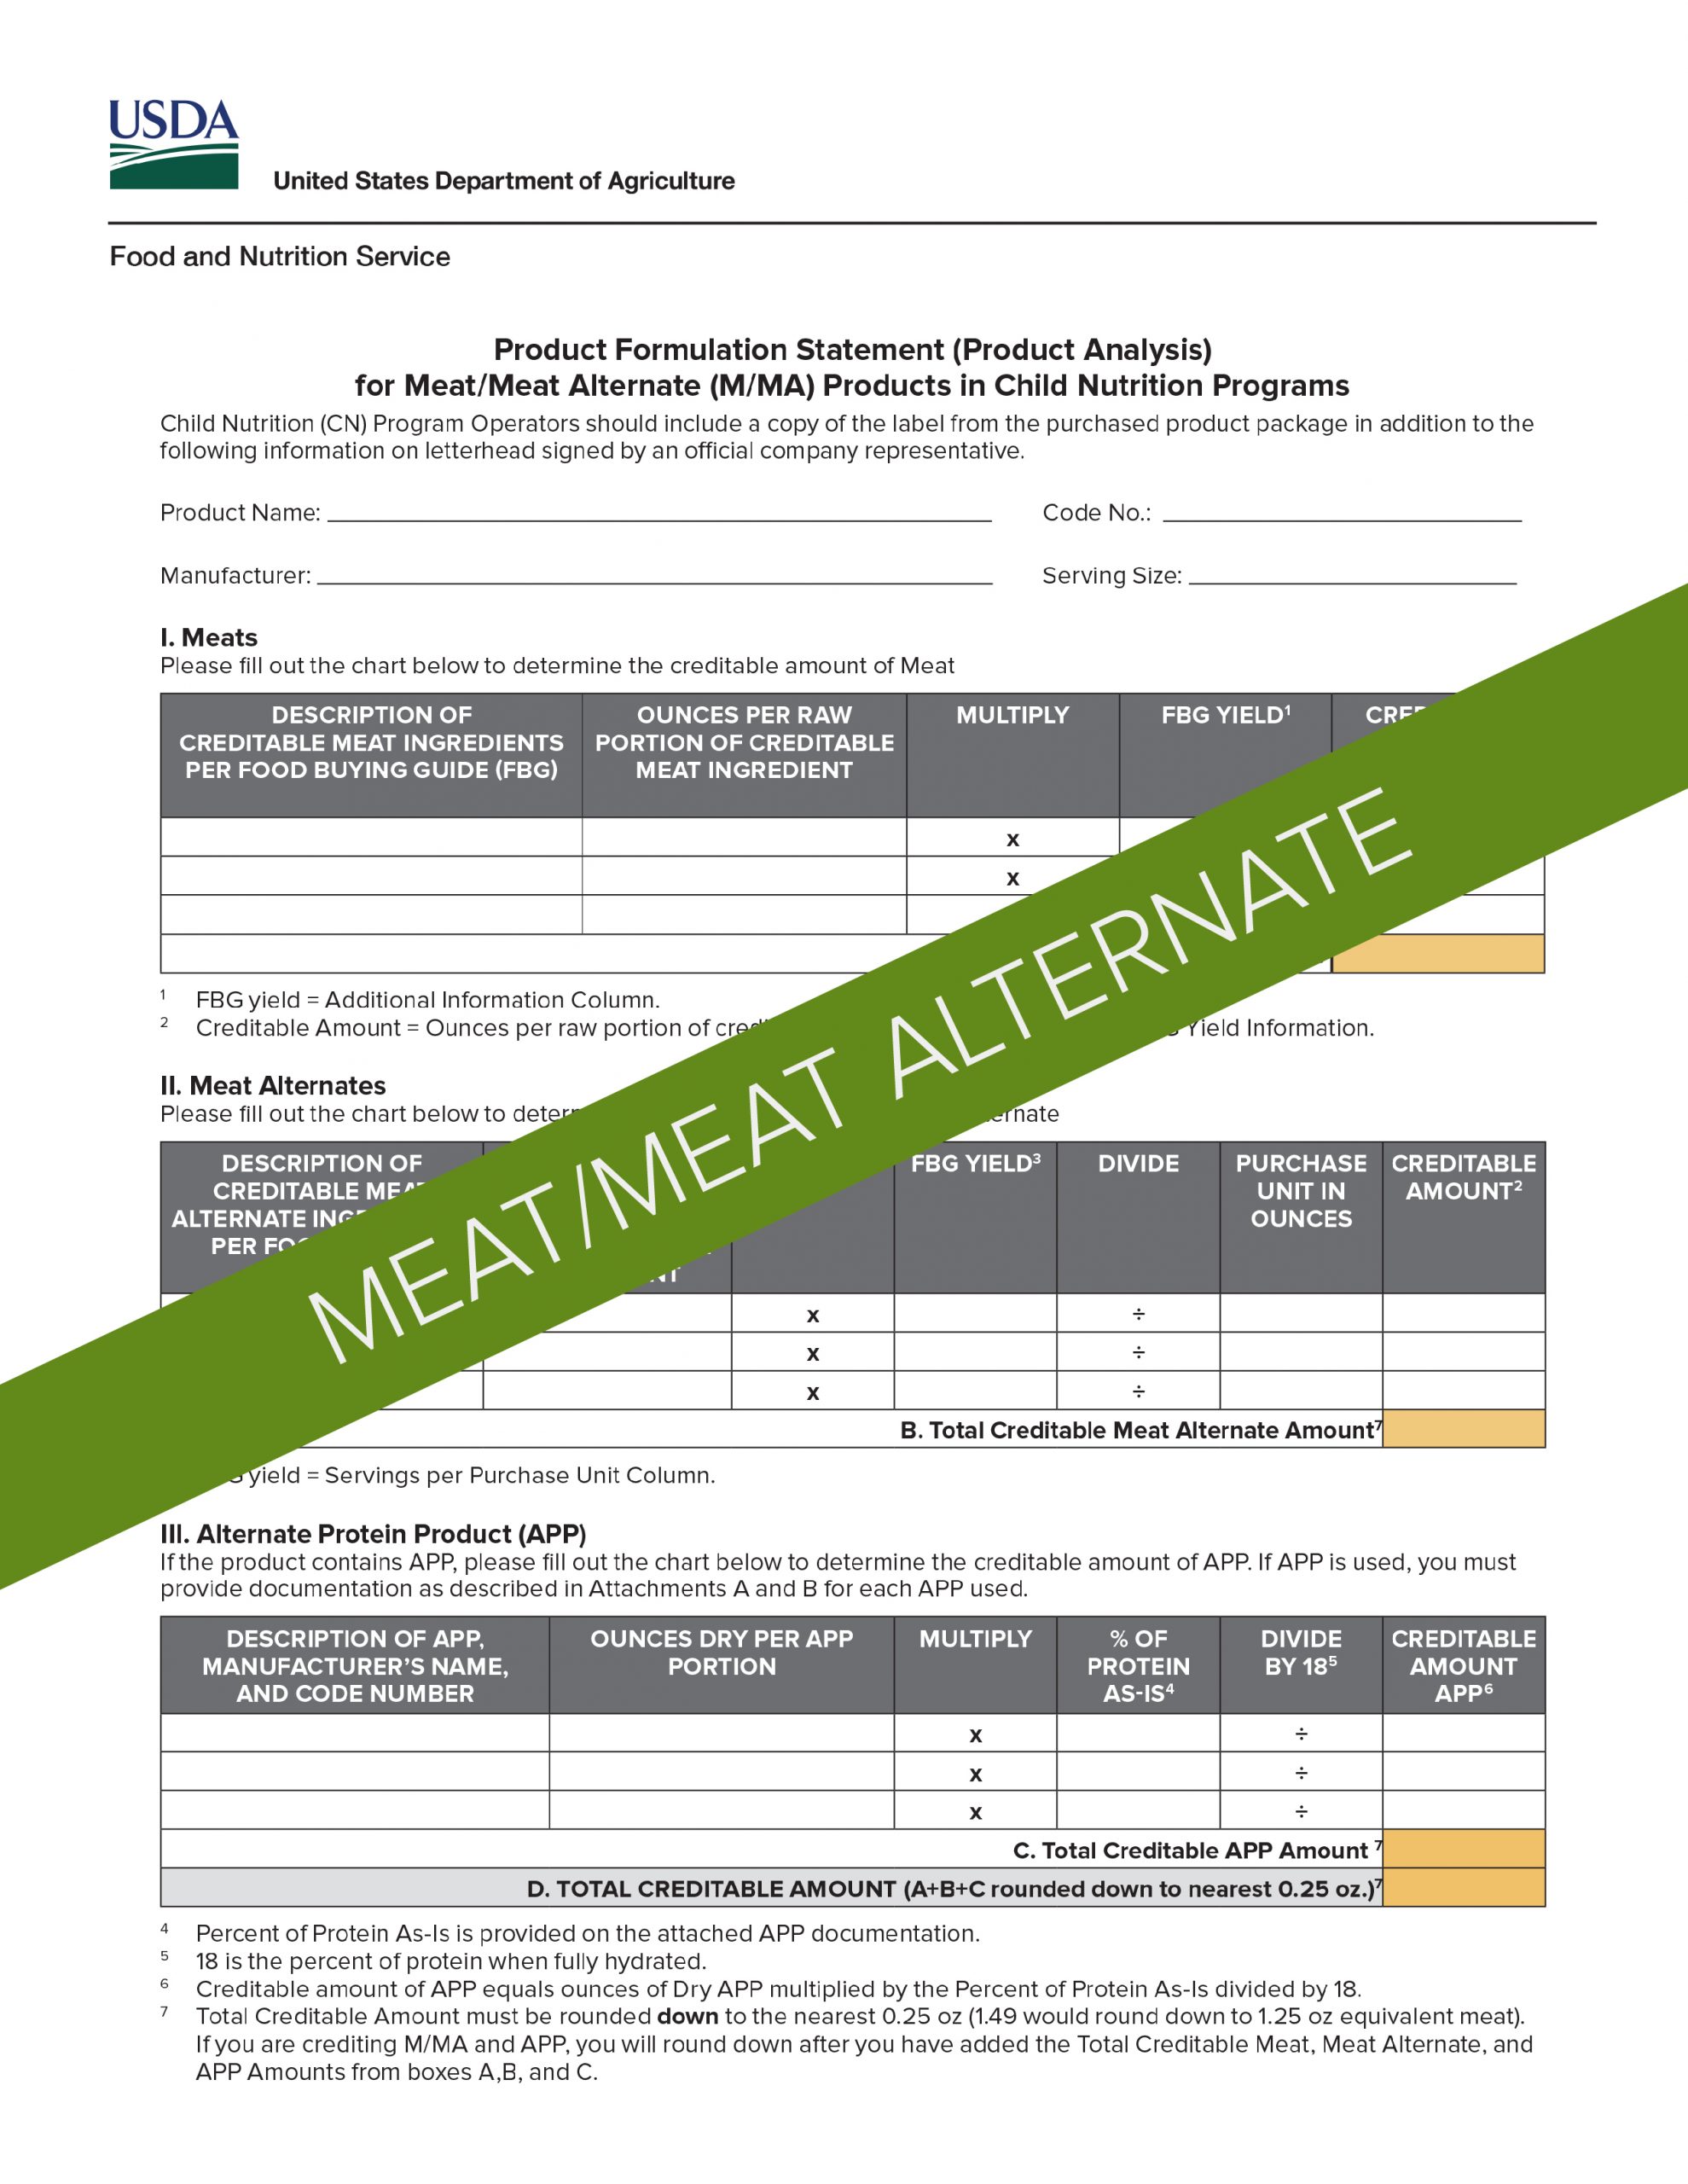 USDA Product Formulation Statement Template for Meat/Meat Alternate